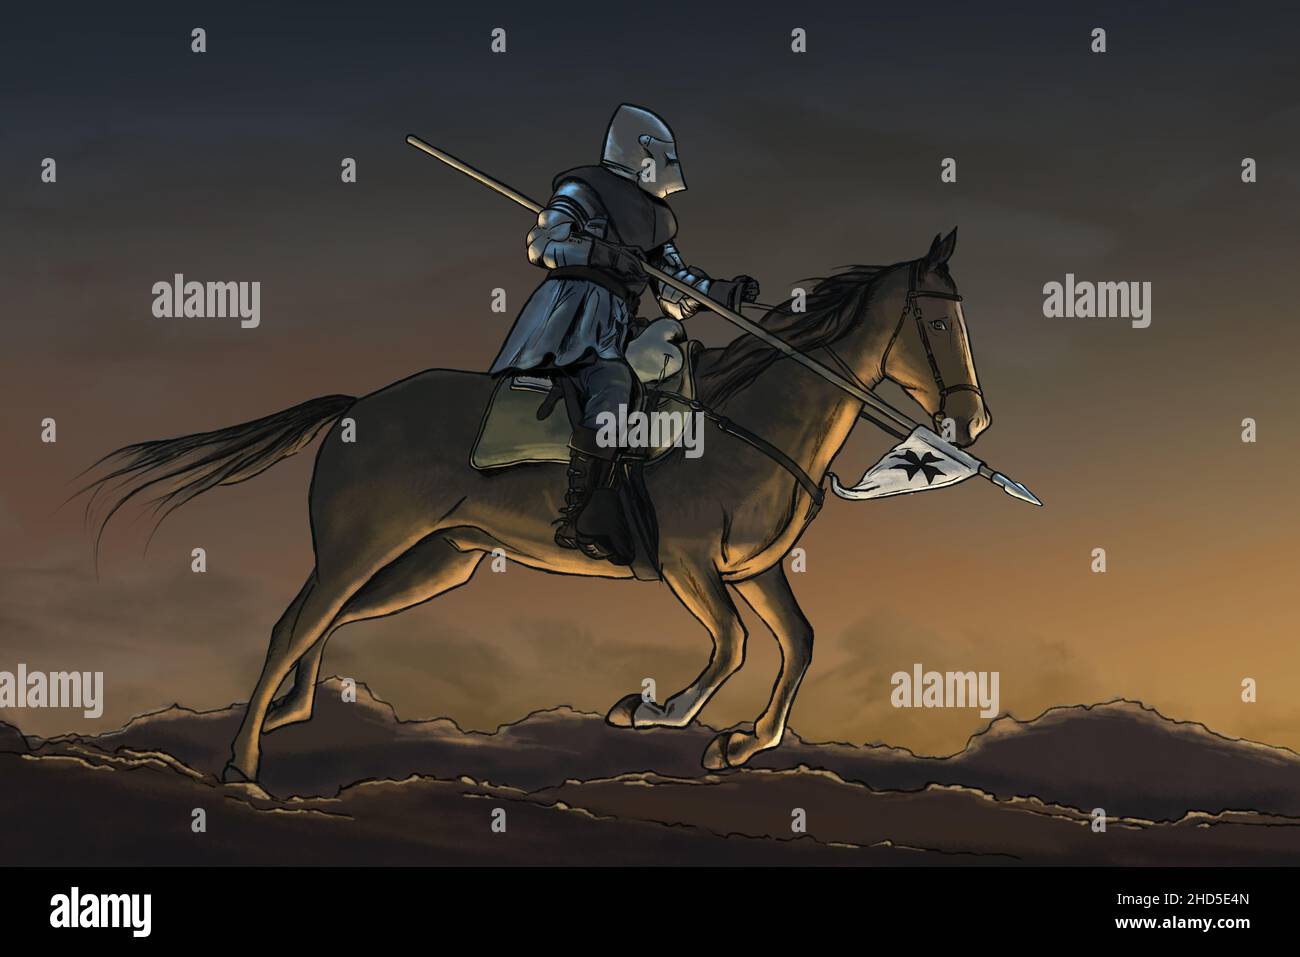 Illustration of knight riders on the horse by the dark sunset sky. Stock Photo